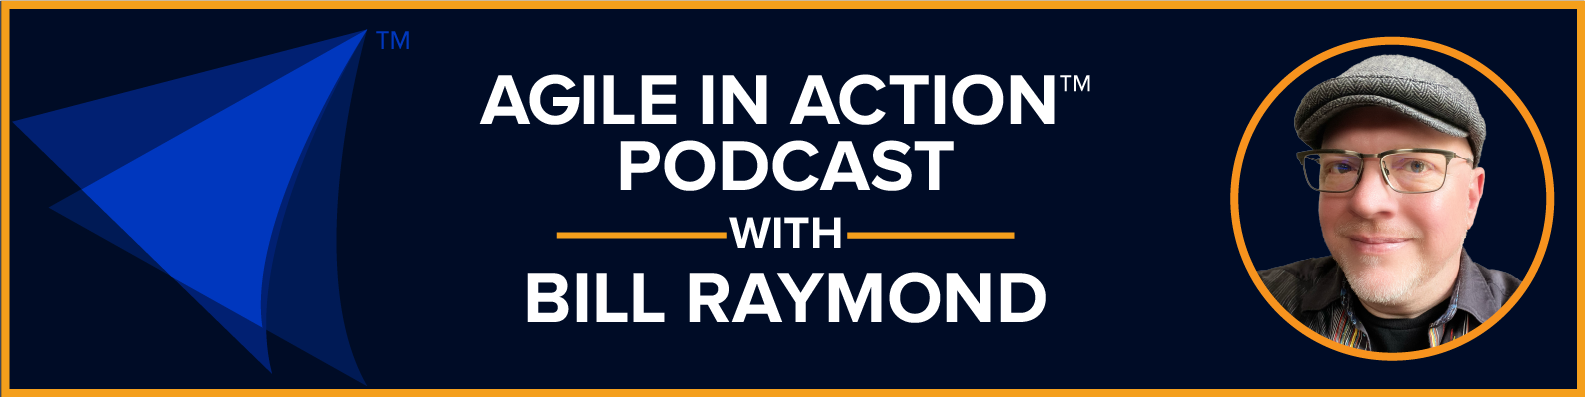 The Agile in Action Podcast with Bill Raymond logo